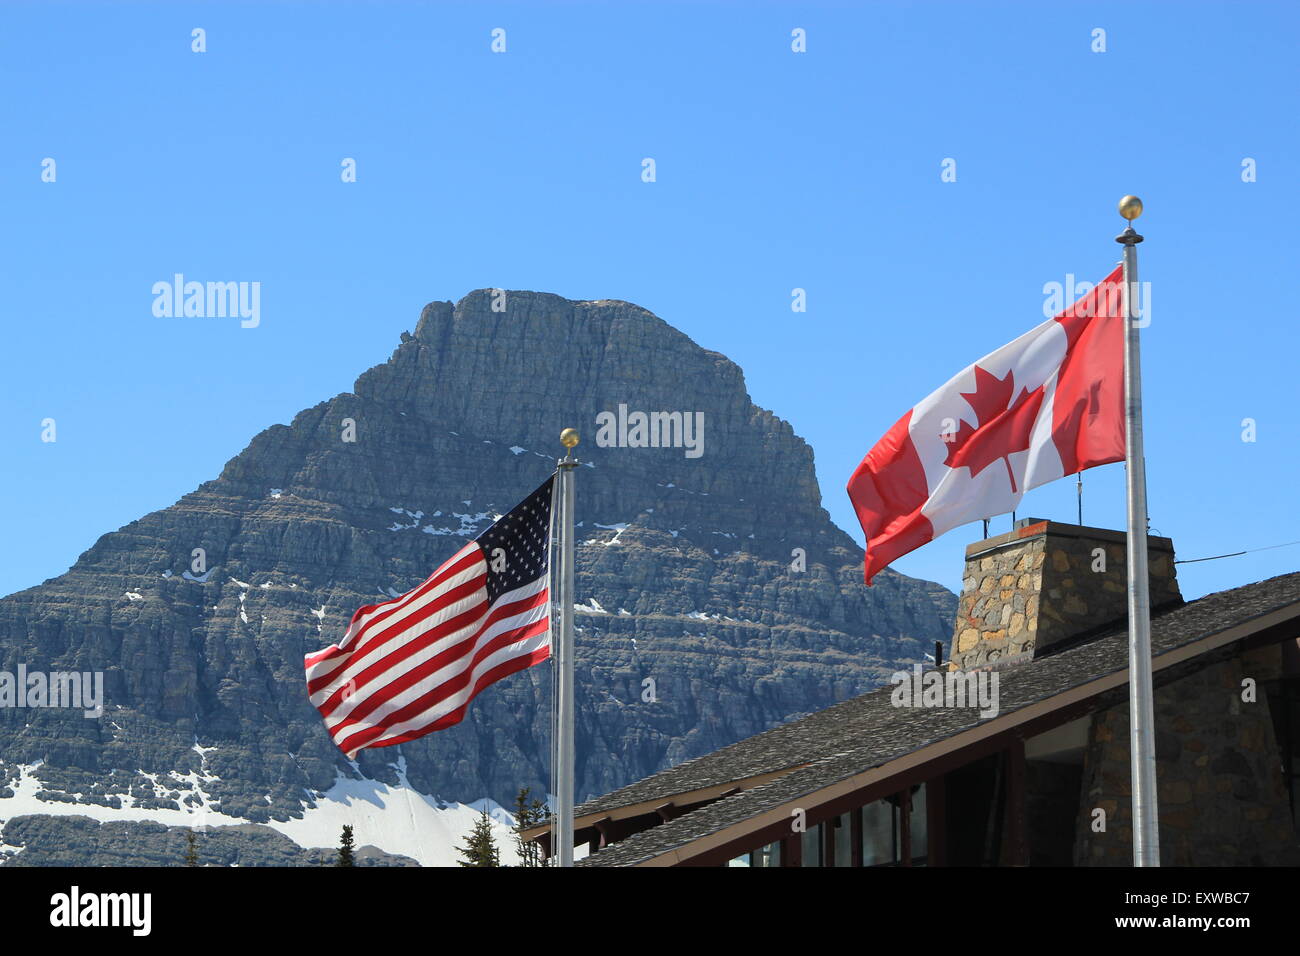 American and Canadian flags, showing the full stars and stripes and maple leaf respectively, on silver flagpoles Stock Photo